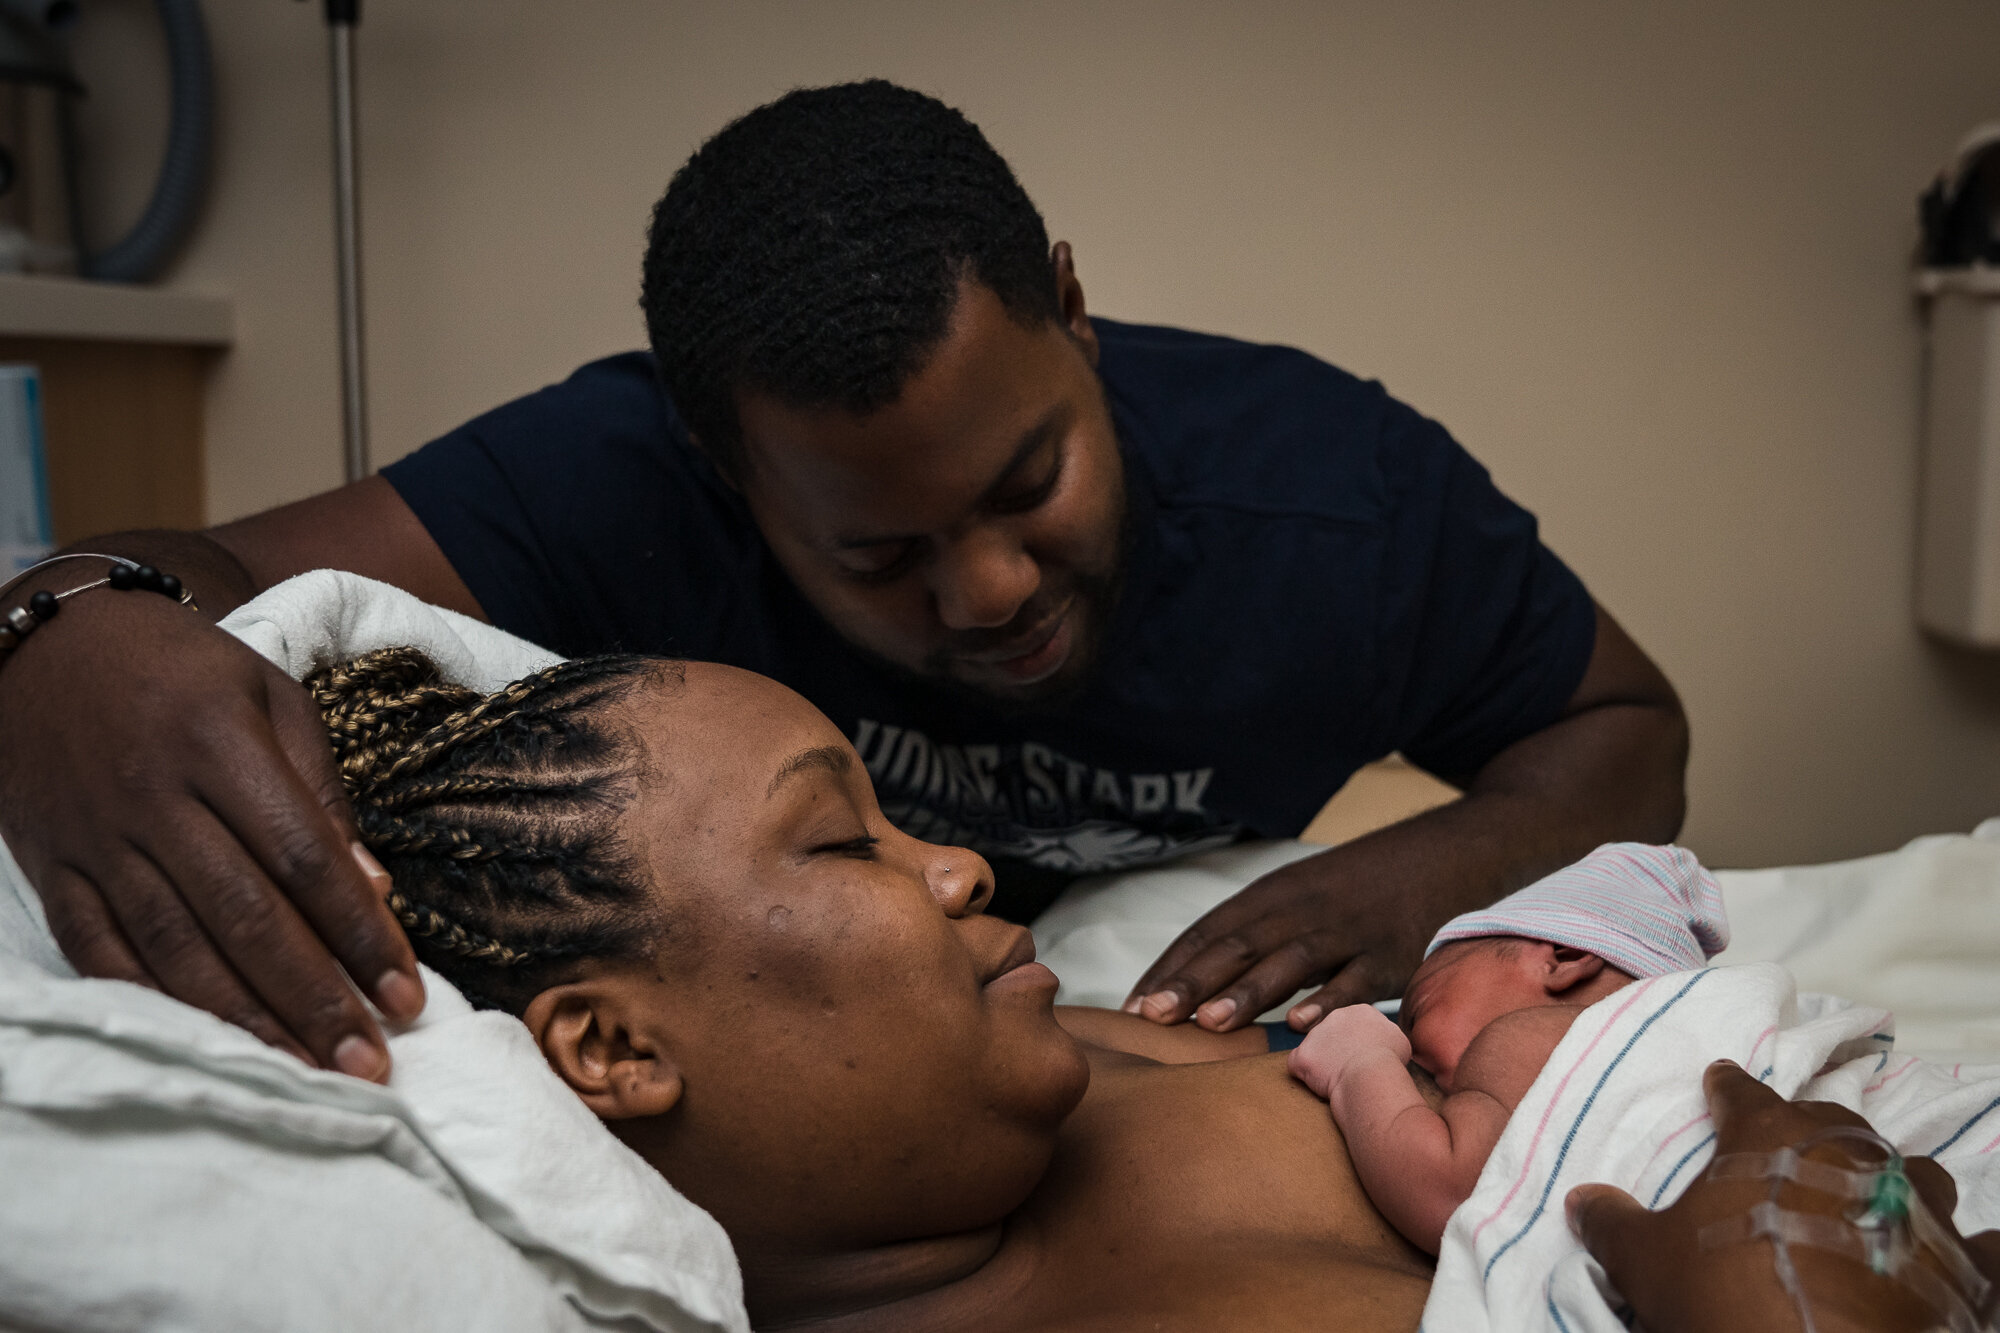 Gather Birth Cooperative- Doula Support and Birth Photography in Minneapolis - August 17, 2019 - 063919.jpg